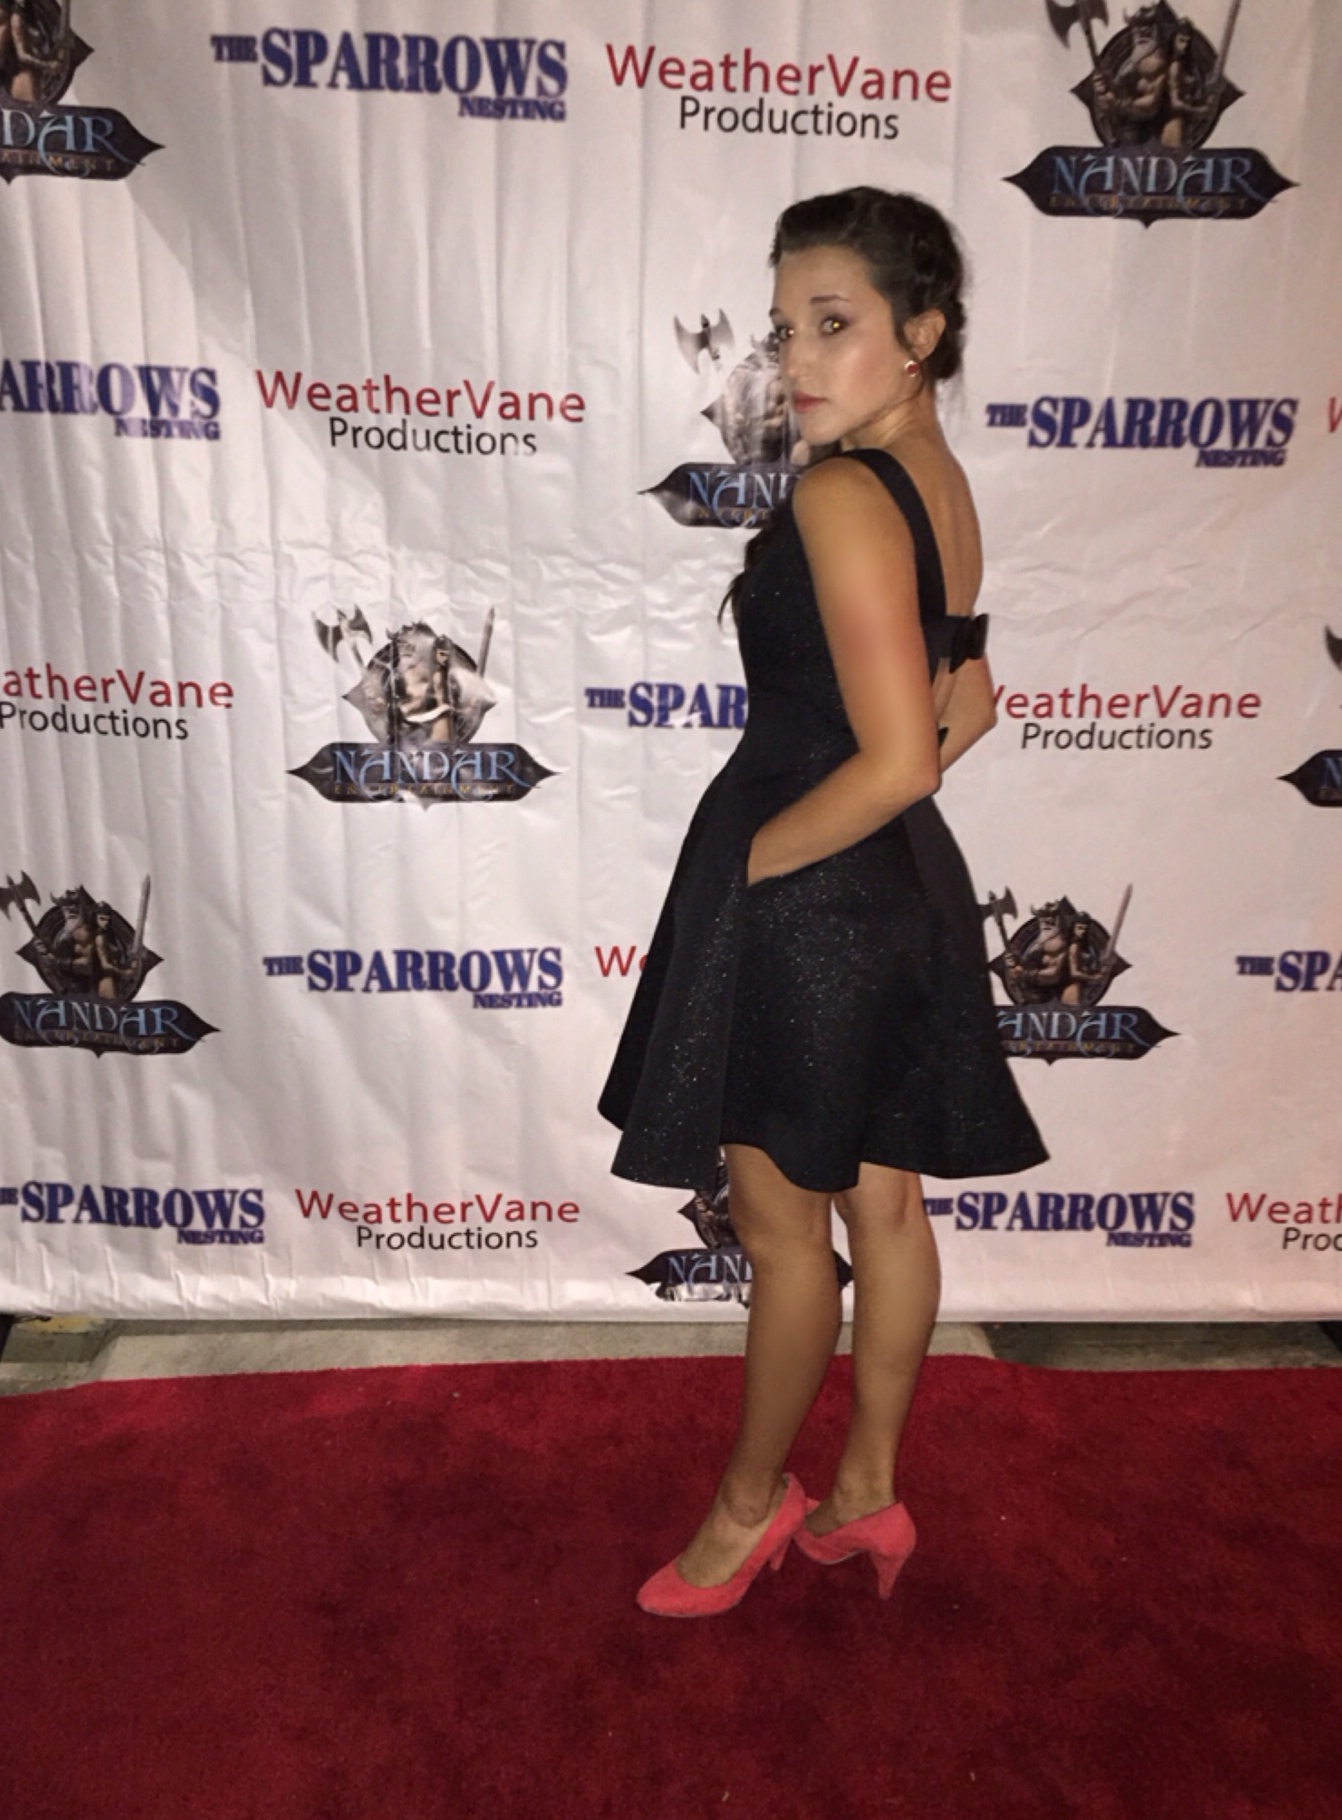 Marisa Davila at the premiere of The Sparrows